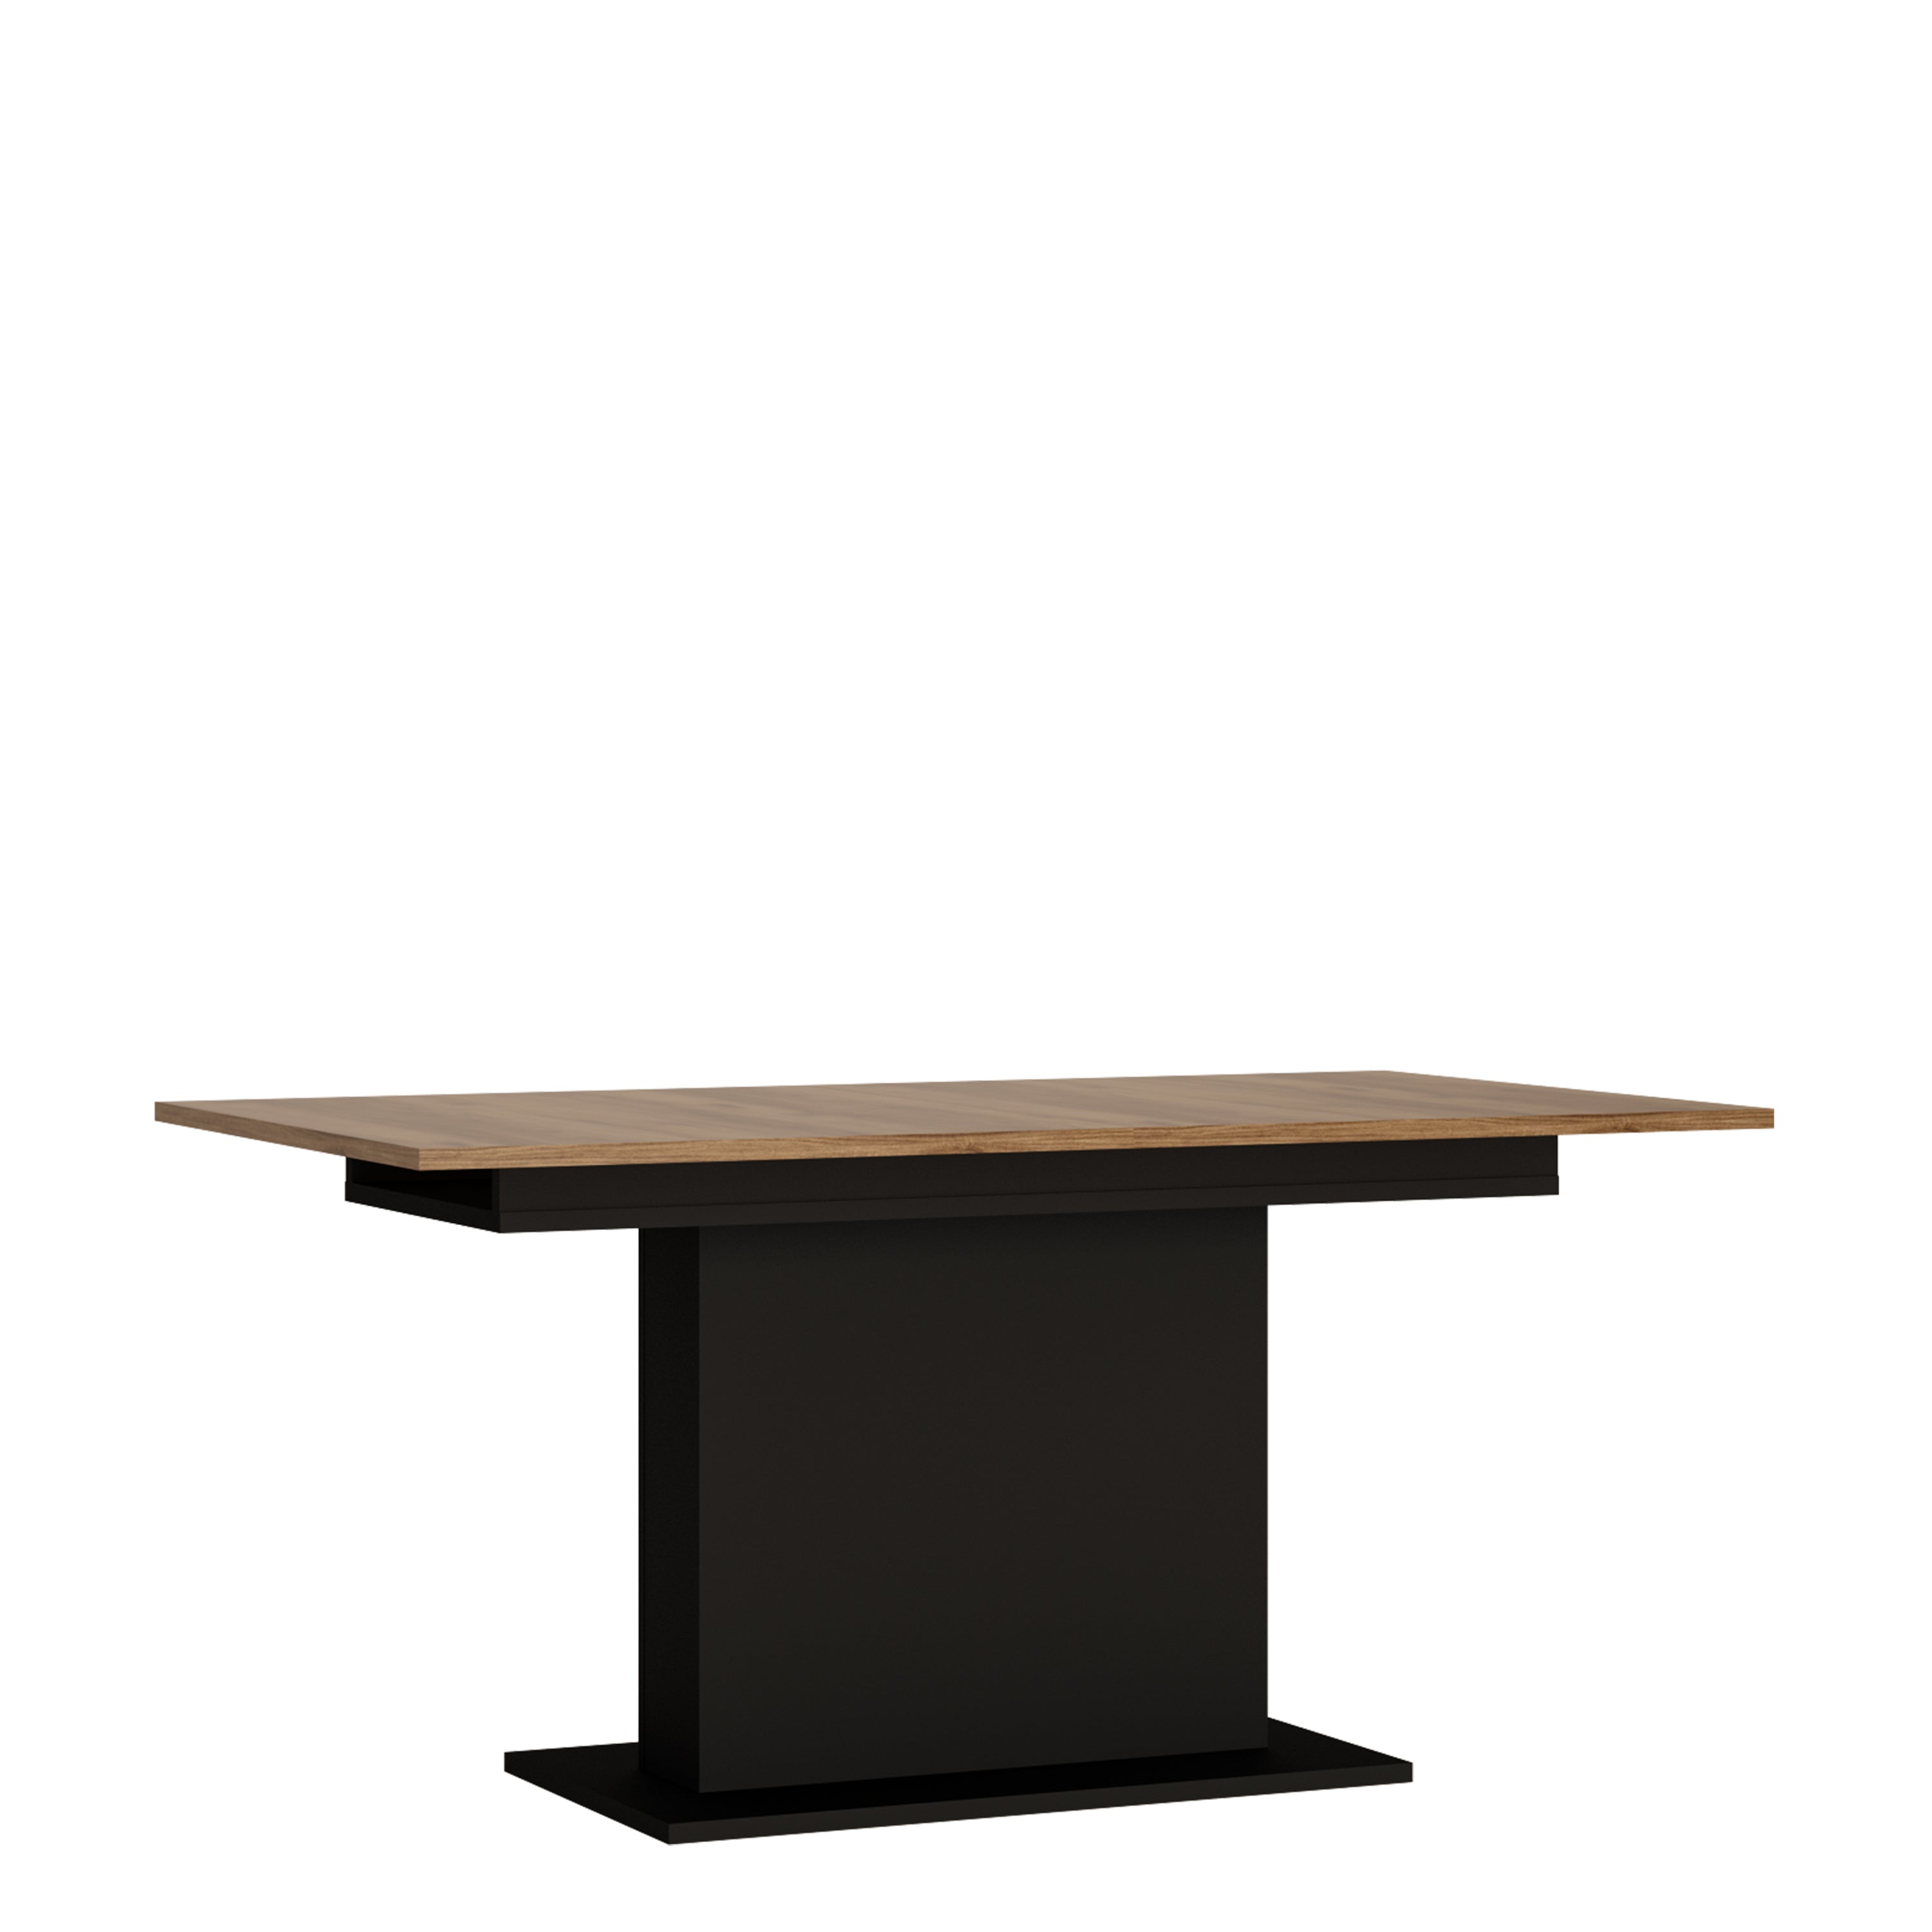 Image of Brolo Extending Dining Table